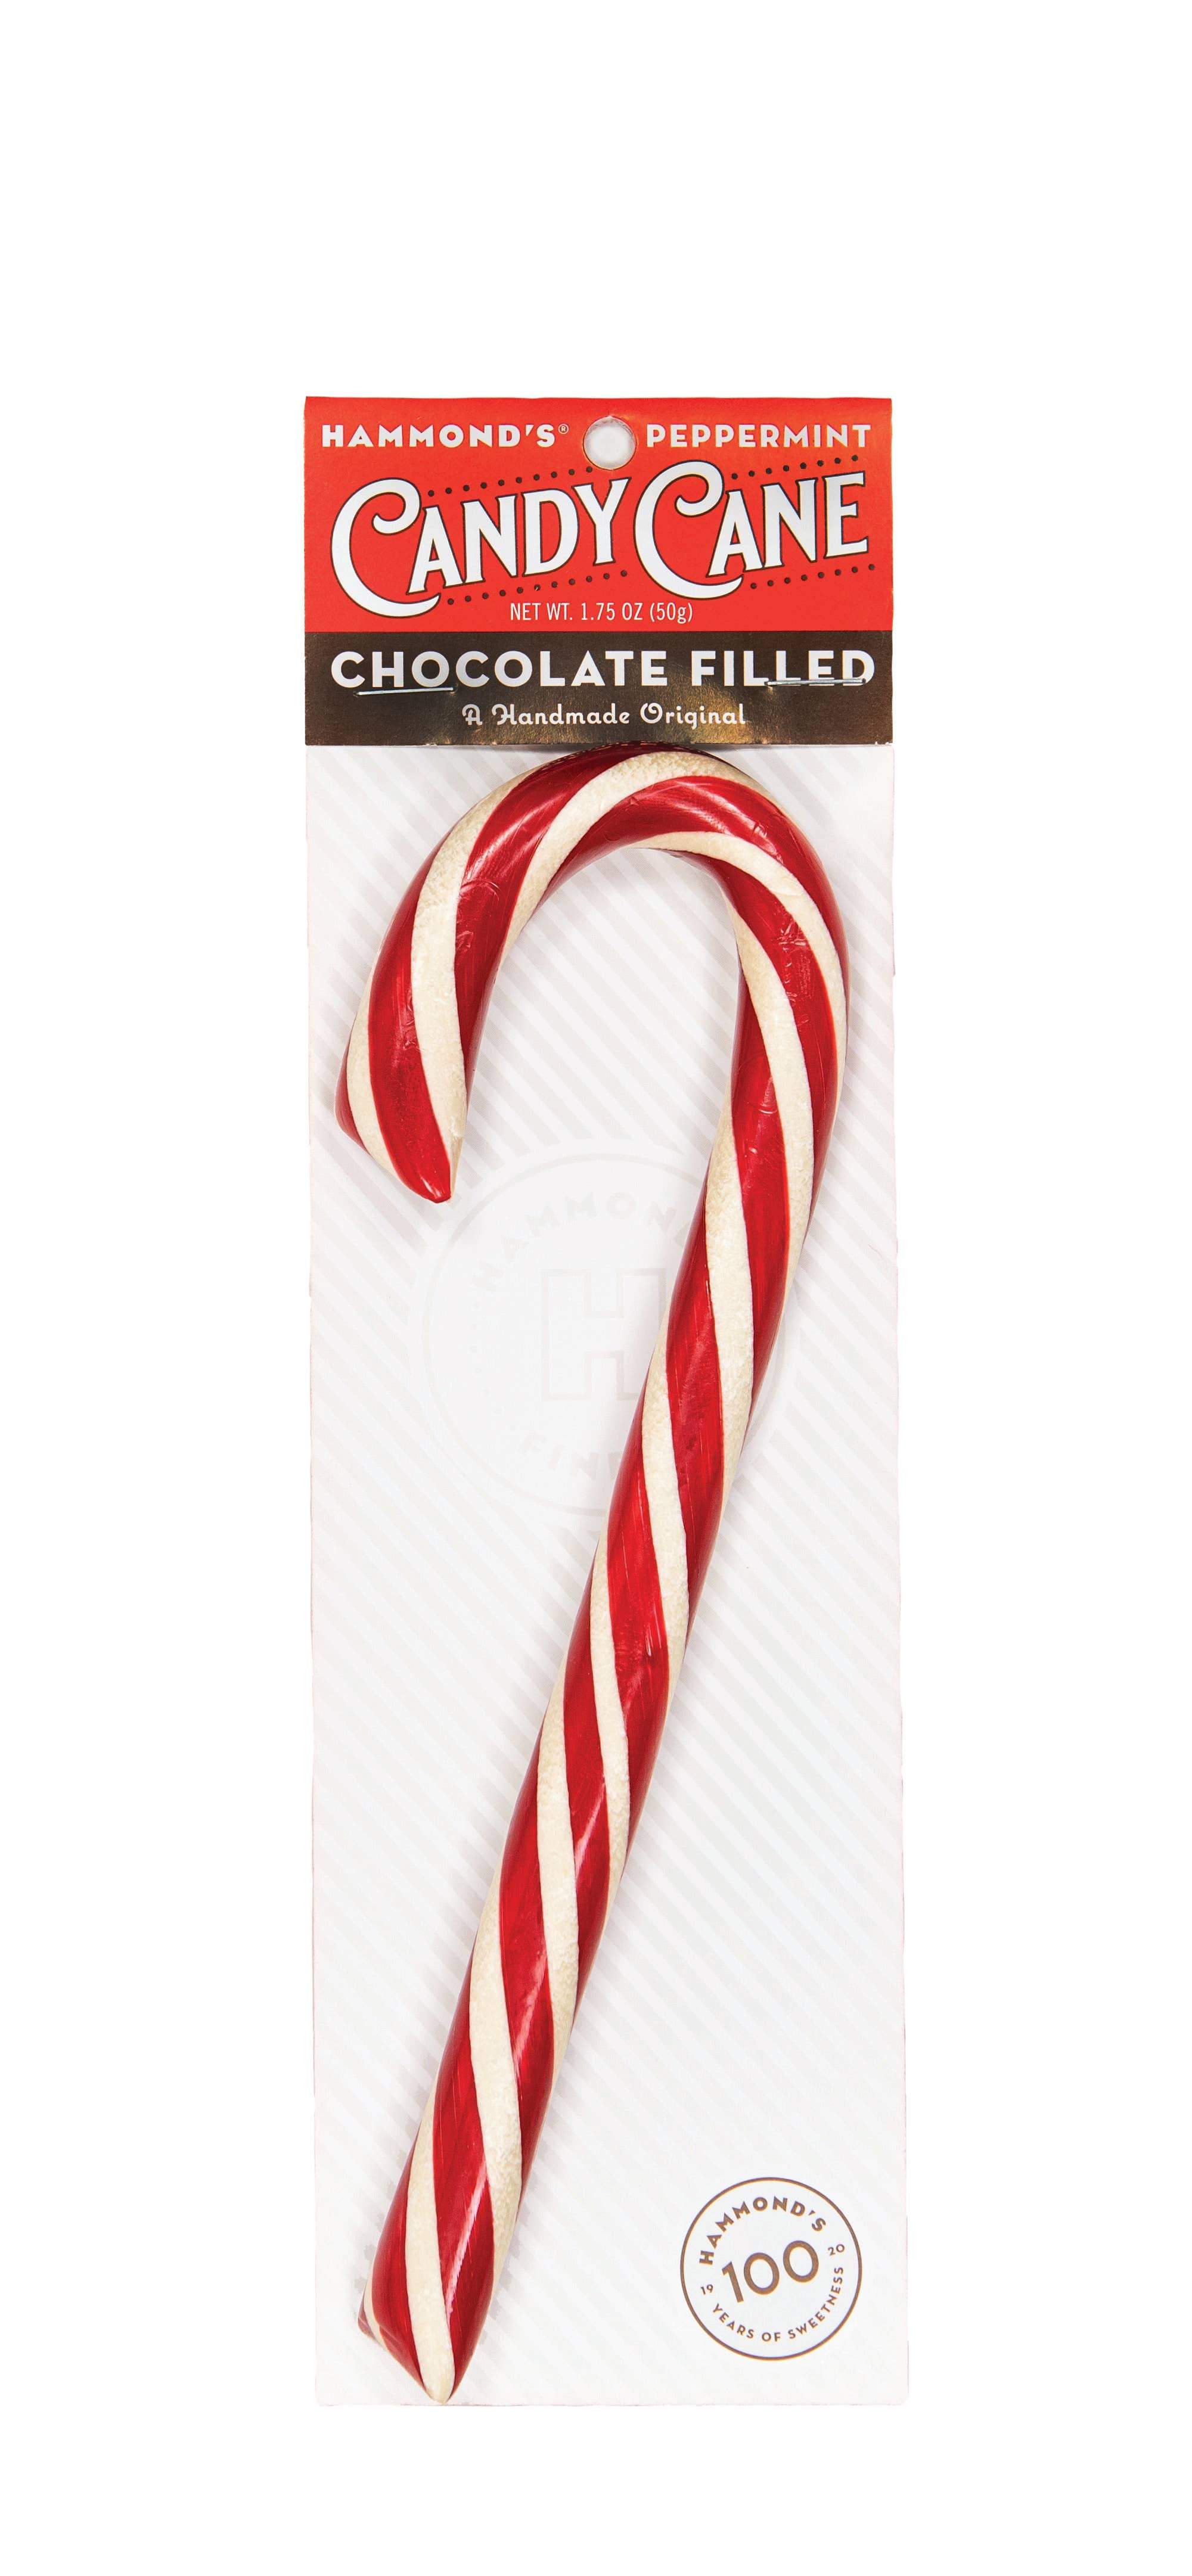 Chocolate Filled Candy Cane